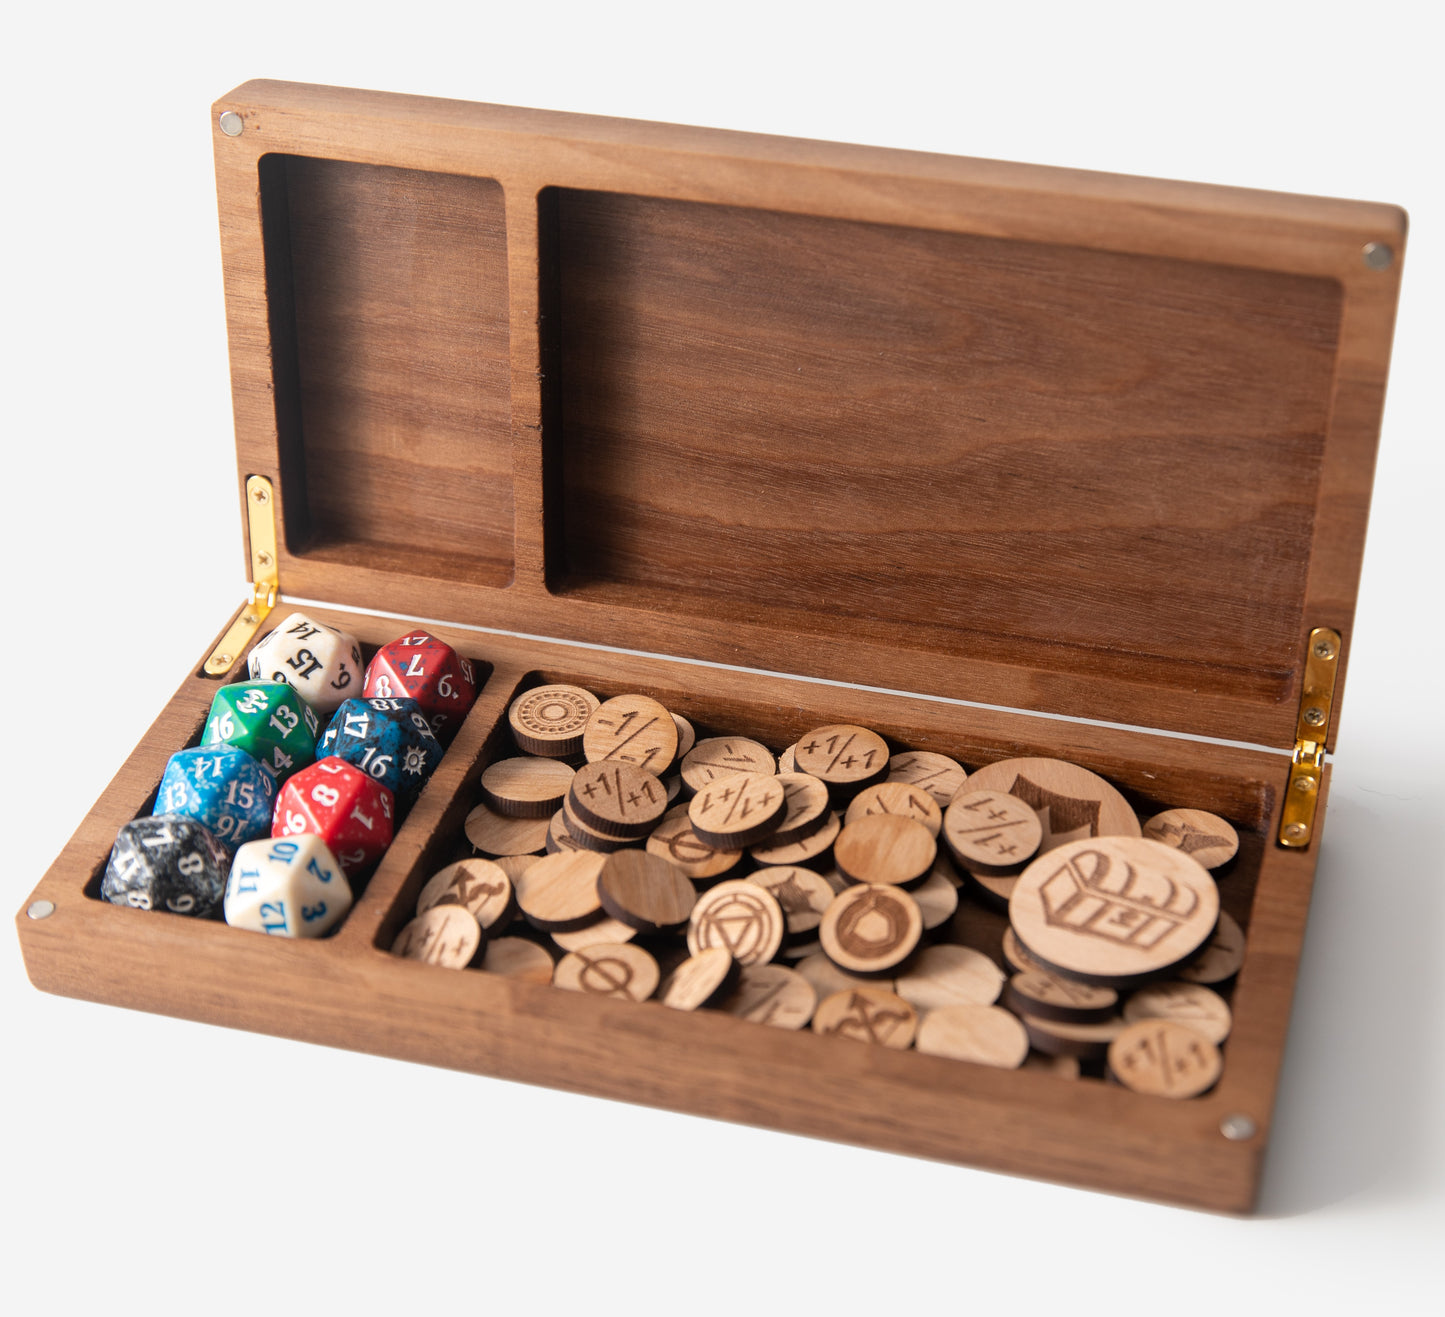 Magic the Gathering - 66pc Set of Counters / Tokens with Hardwood Case